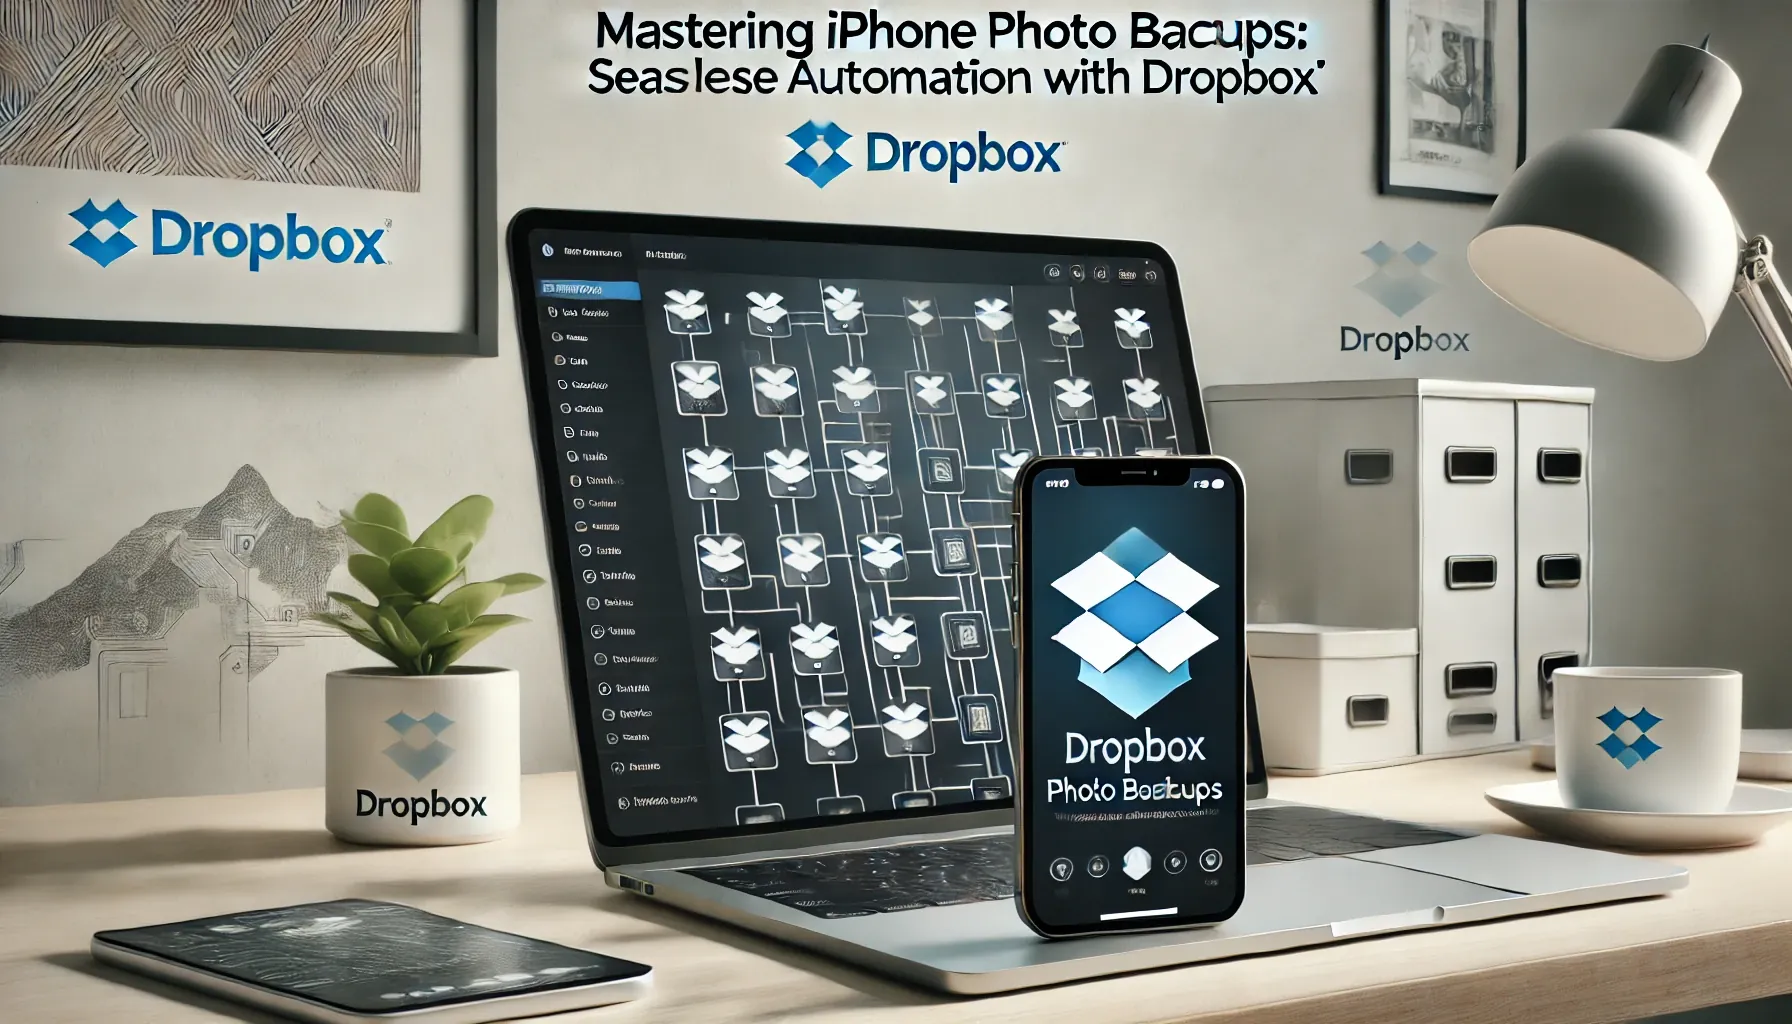 Mastering iPhone Photo Backups: Seamless Automation with Dropbox